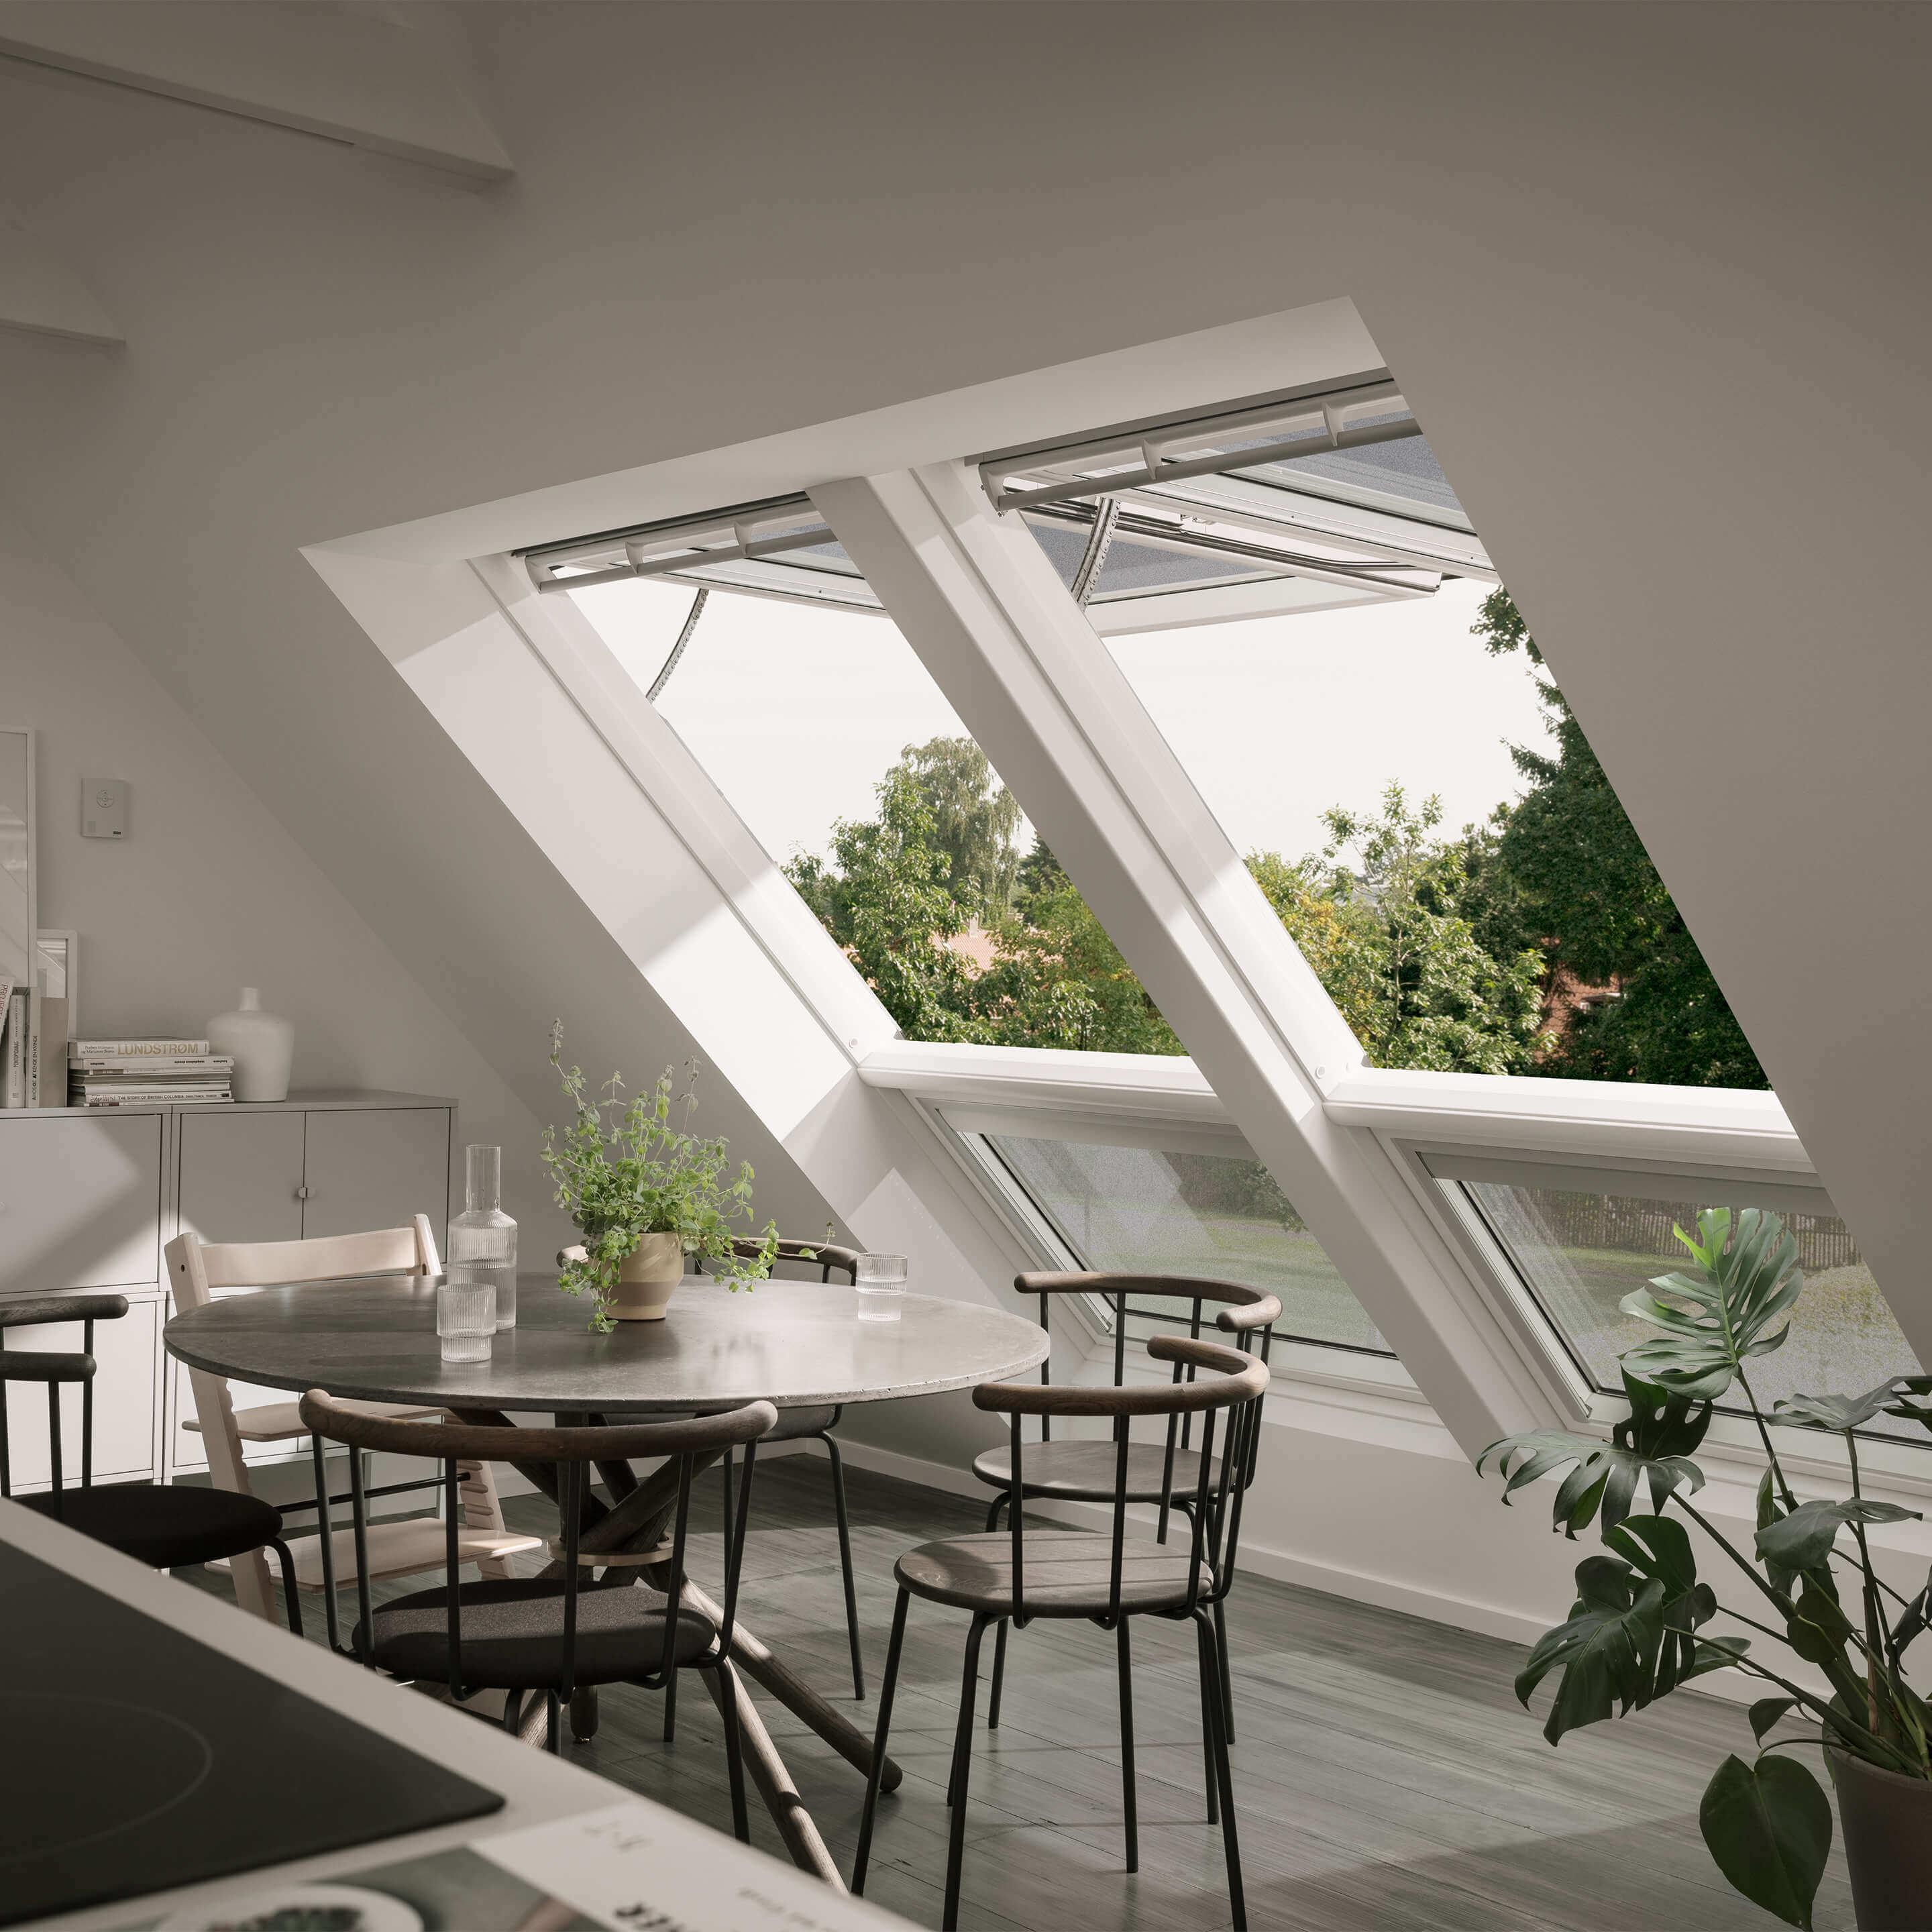 Kitchen and dining area with large double VELUX roof window solution open to let in air